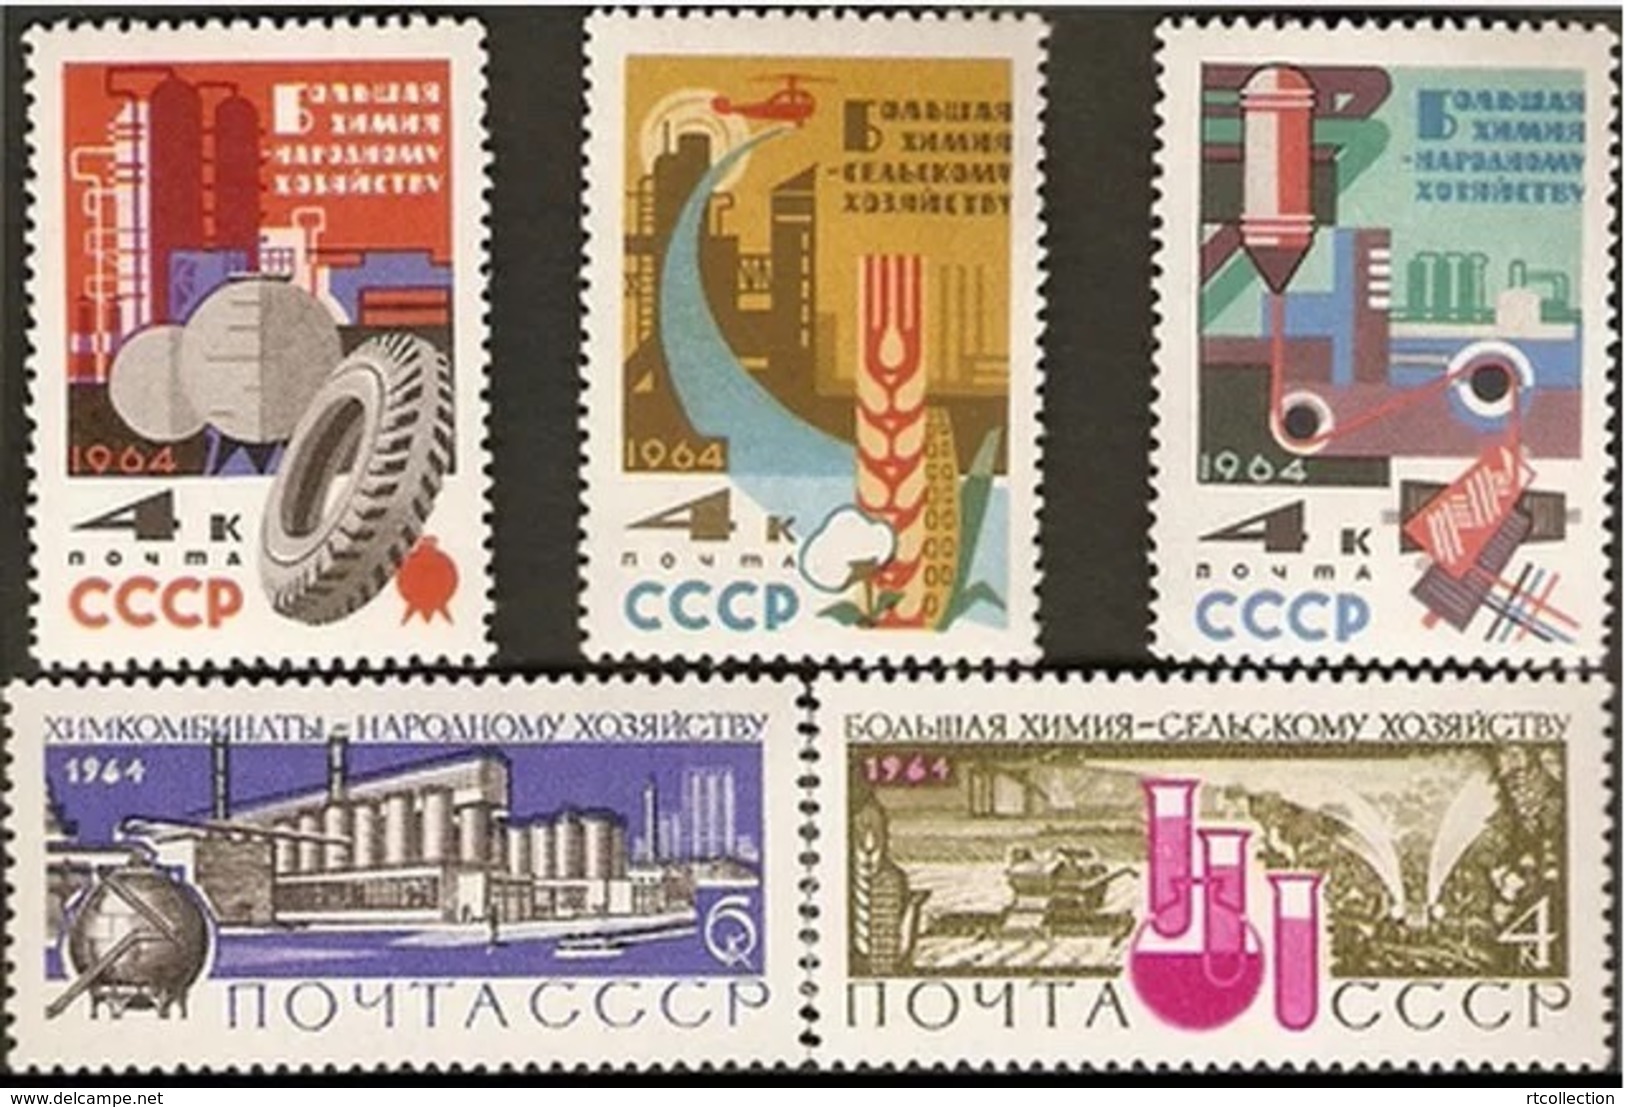 USSR Russia 1964 Importance Of Chemical Industries To Soviet Economy Sciences Industry Chemistry Stamps MNH - Unused Stamps